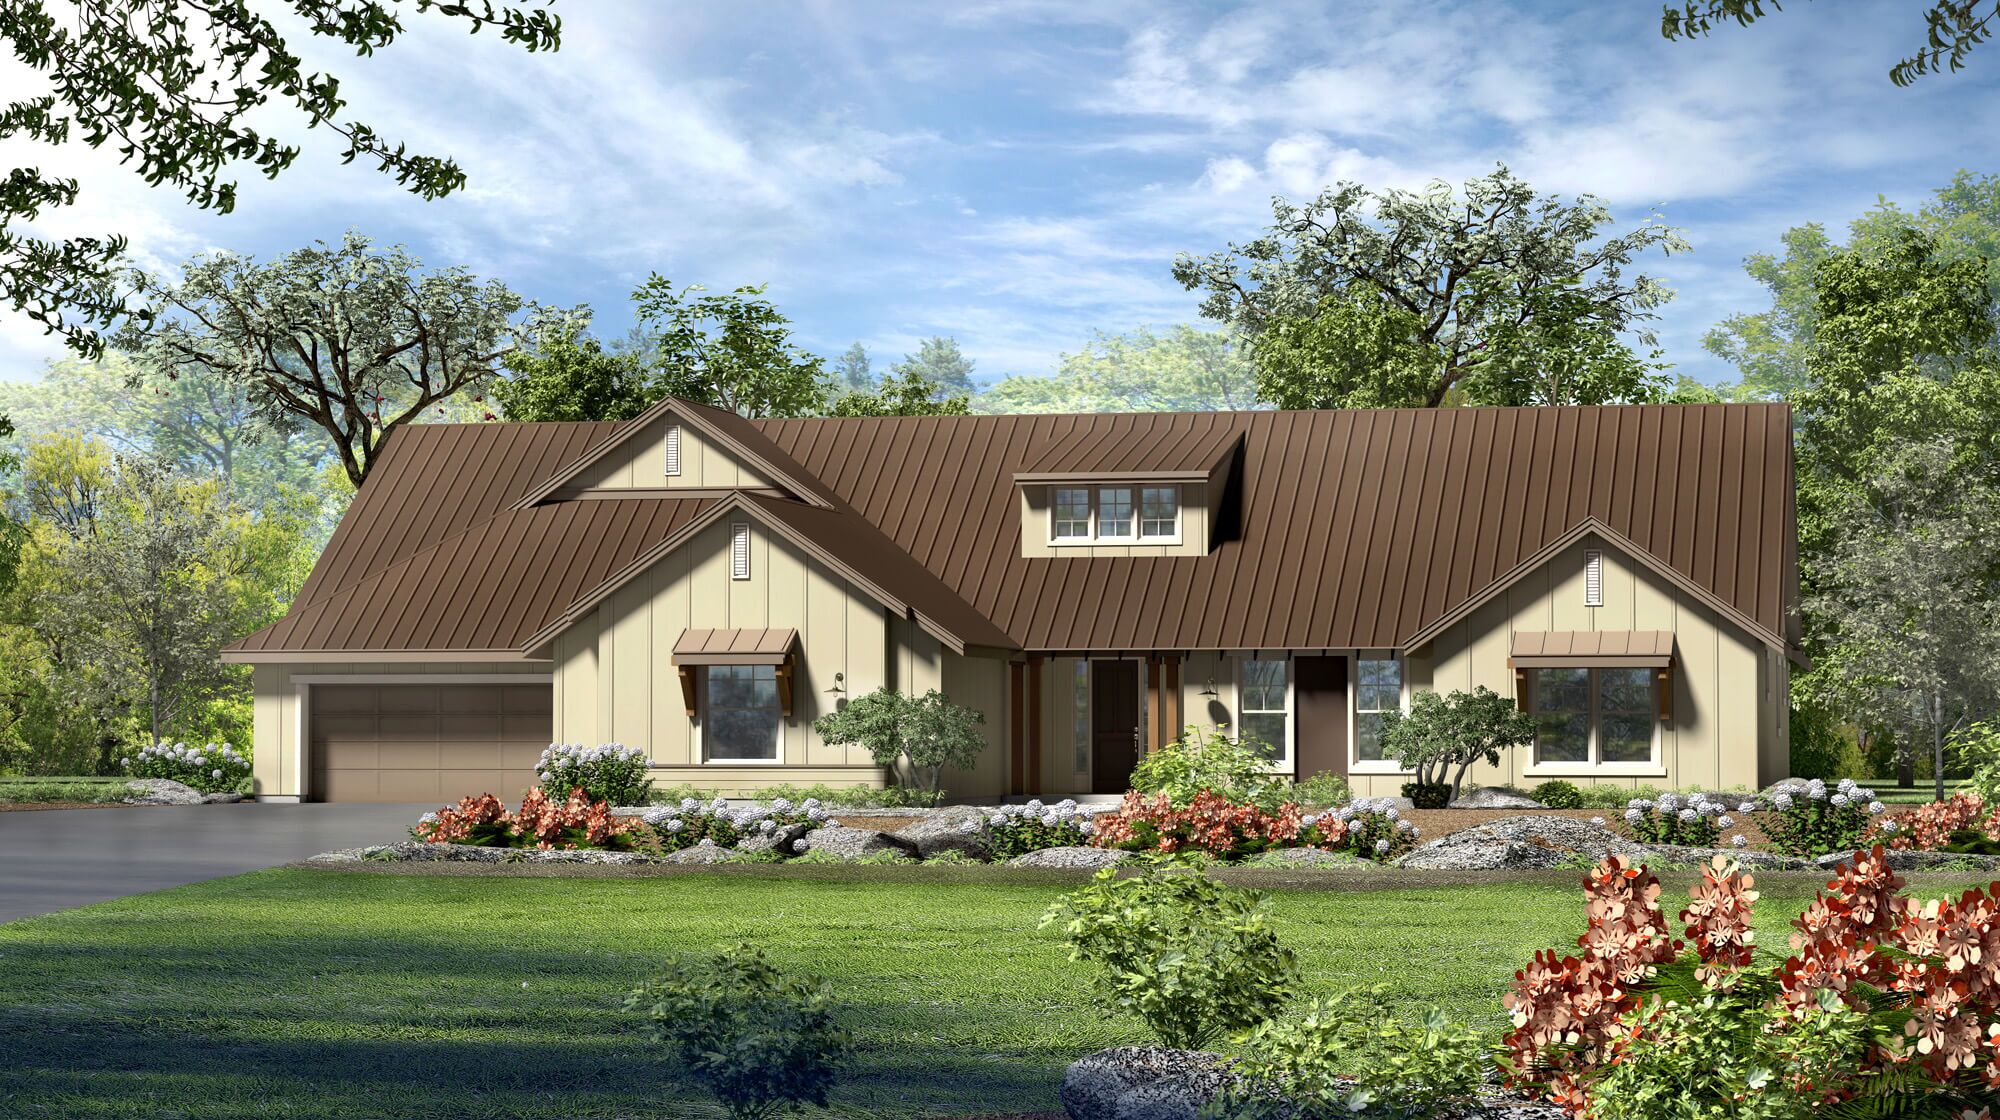 Exterior Rendering - Single Family House - Kissing Tree Bungalow 3D Rendering